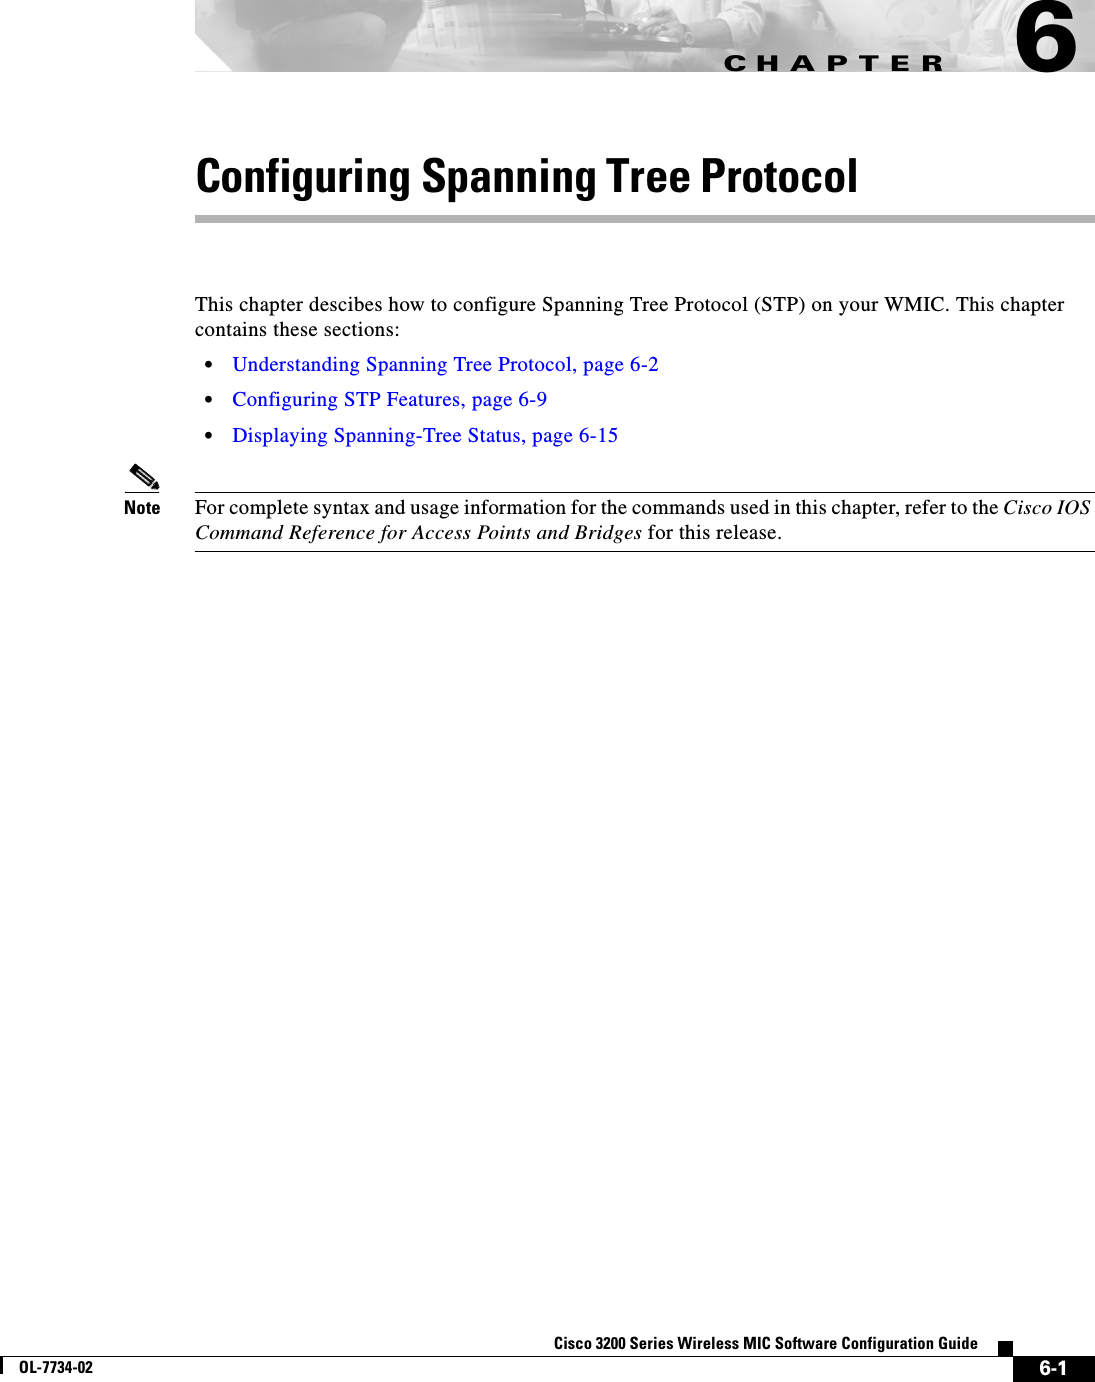 CHAPTER6-1Cisco 3200 Series Wireless MIC Software Configuration GuideOL-7734-026Configuring Spanning Tree ProtocolThis chapter descibes how to configure Spanning Tree Protocol (STP) on your WMIC. This chapter contains these sections:•Understanding Spanning Tree Protocol, page 6-2•Configuring STP Features, page 6-9•Displaying Spanning-Tree Status, page 6-15Note For complete syntax and usage information for the commands used in this chapter, refer to the Cisco IOS Command Reference for Access Points and Bridges for this release.